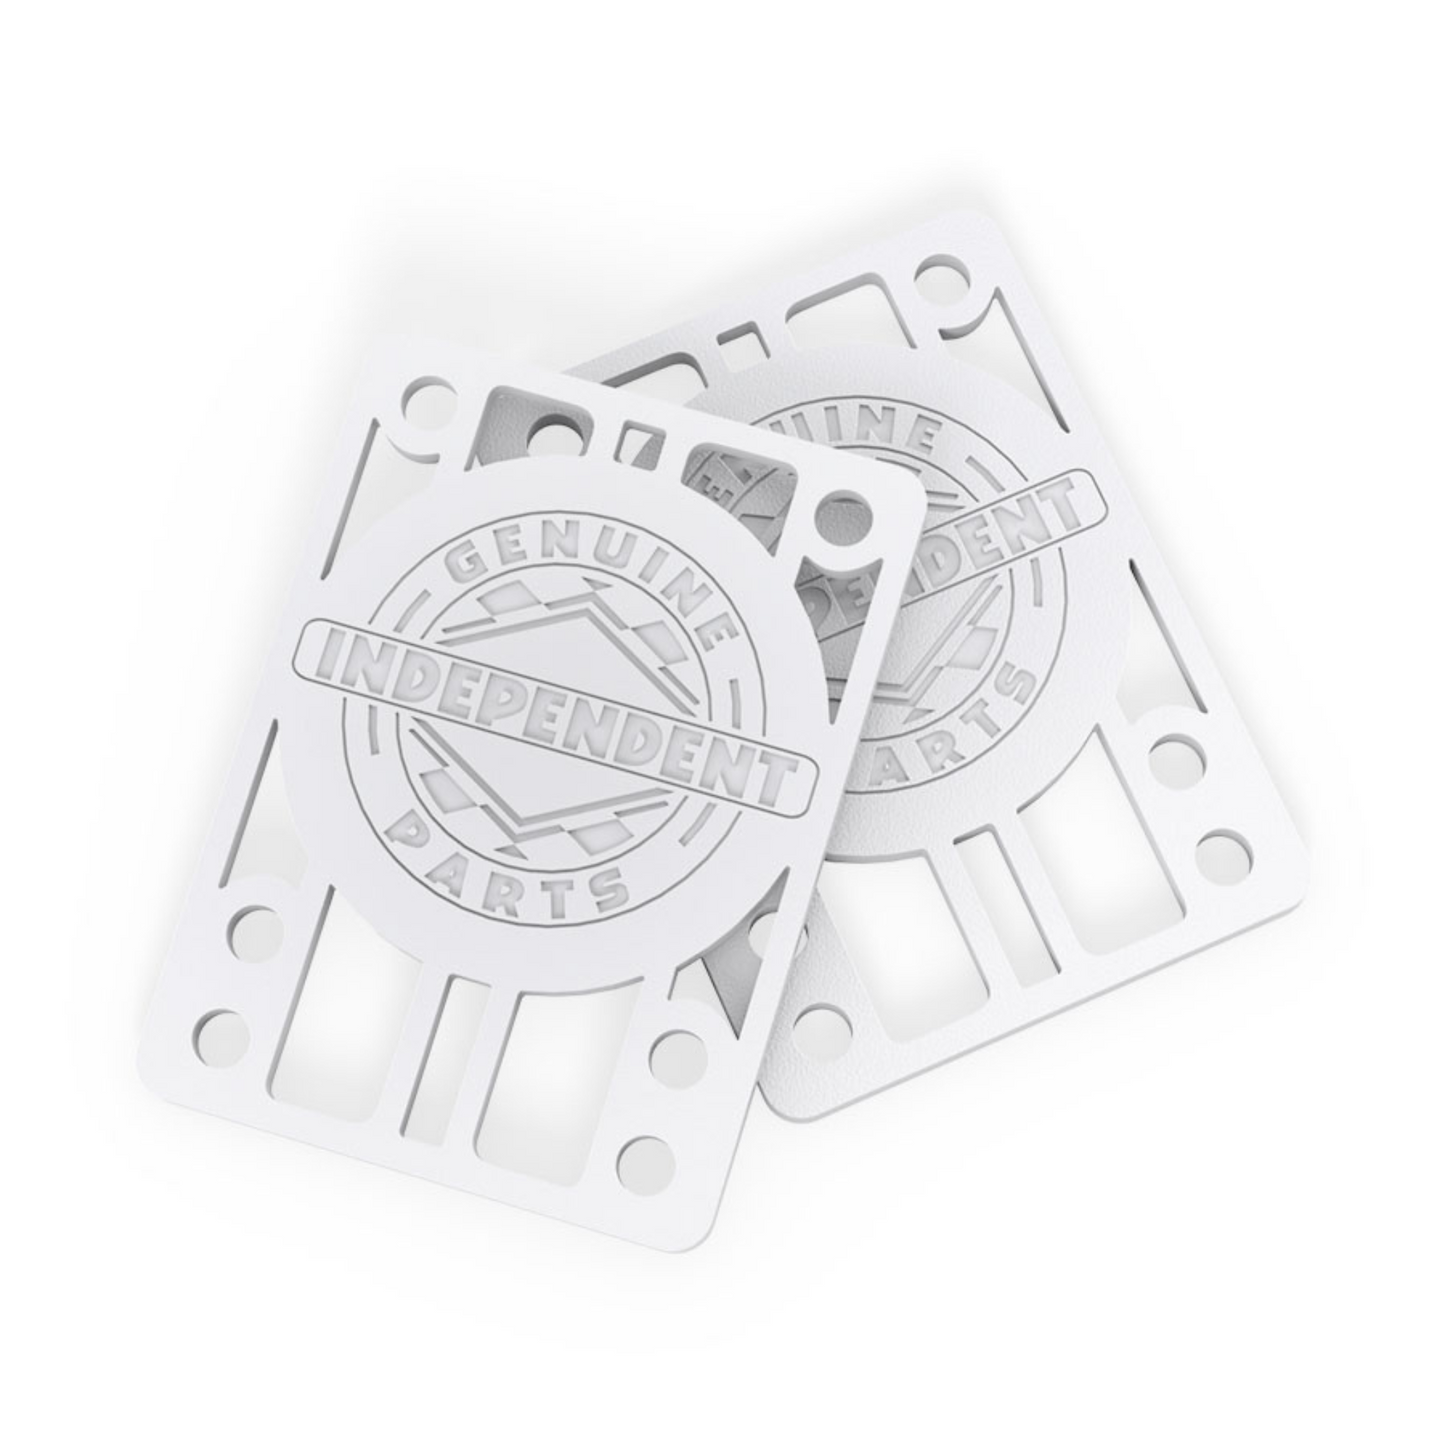 Independent Genuine Parts 1/8" Riser Pads - White Pk/2